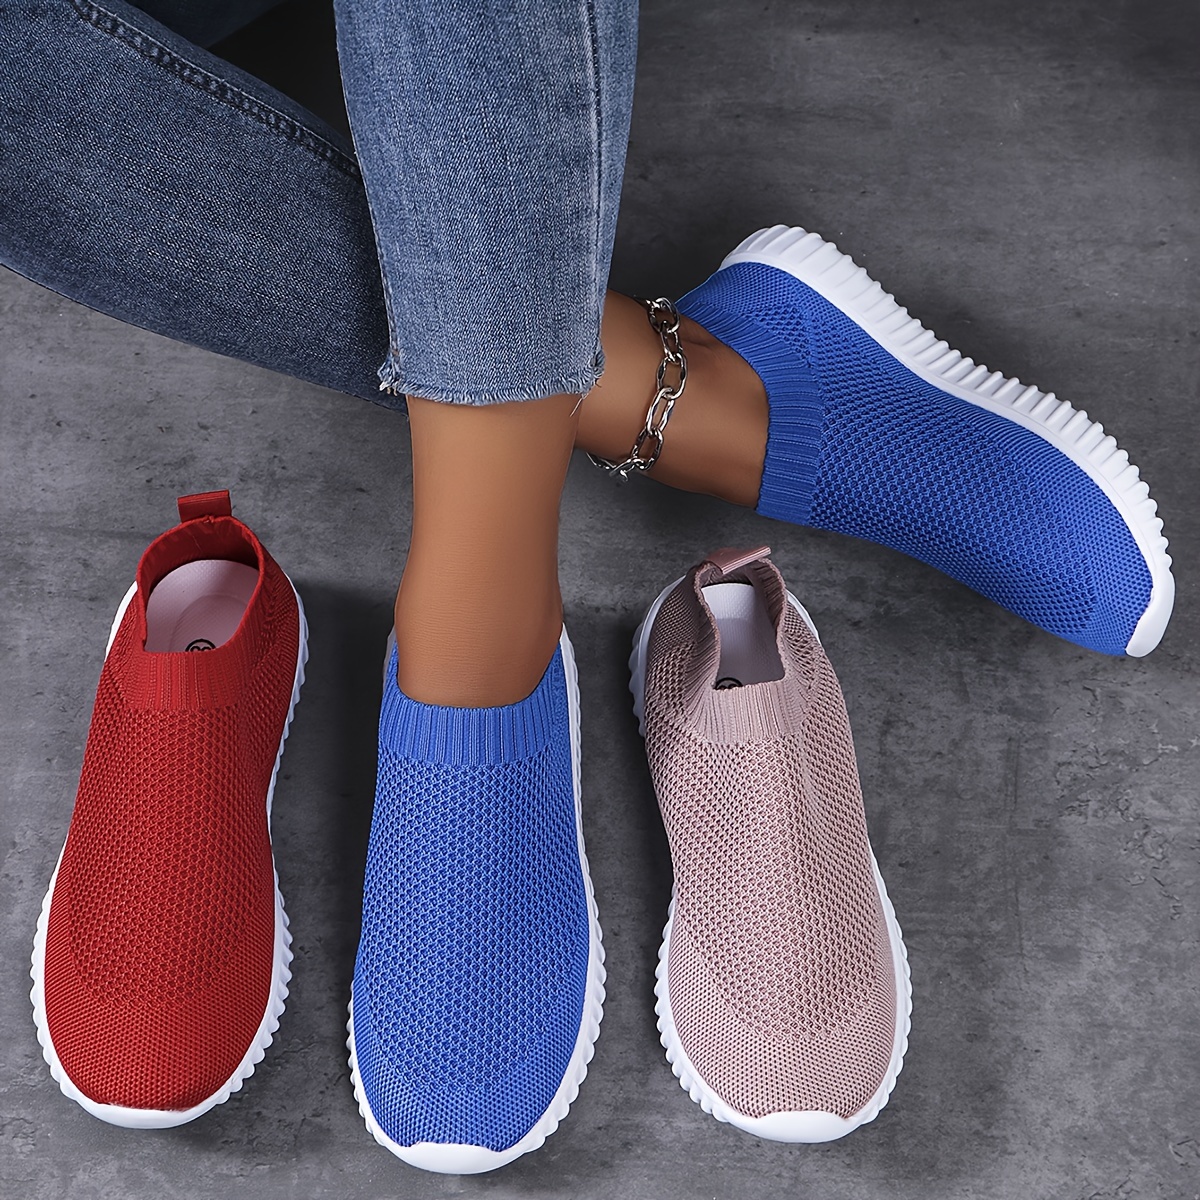 

Women's Slip-on Walking Sneakers, Breathable Mesh Casual Shoes, Comfortable Sports Camping Footwear, Lightweight Fabric, Non-slip Sole - Available Multiple Colour